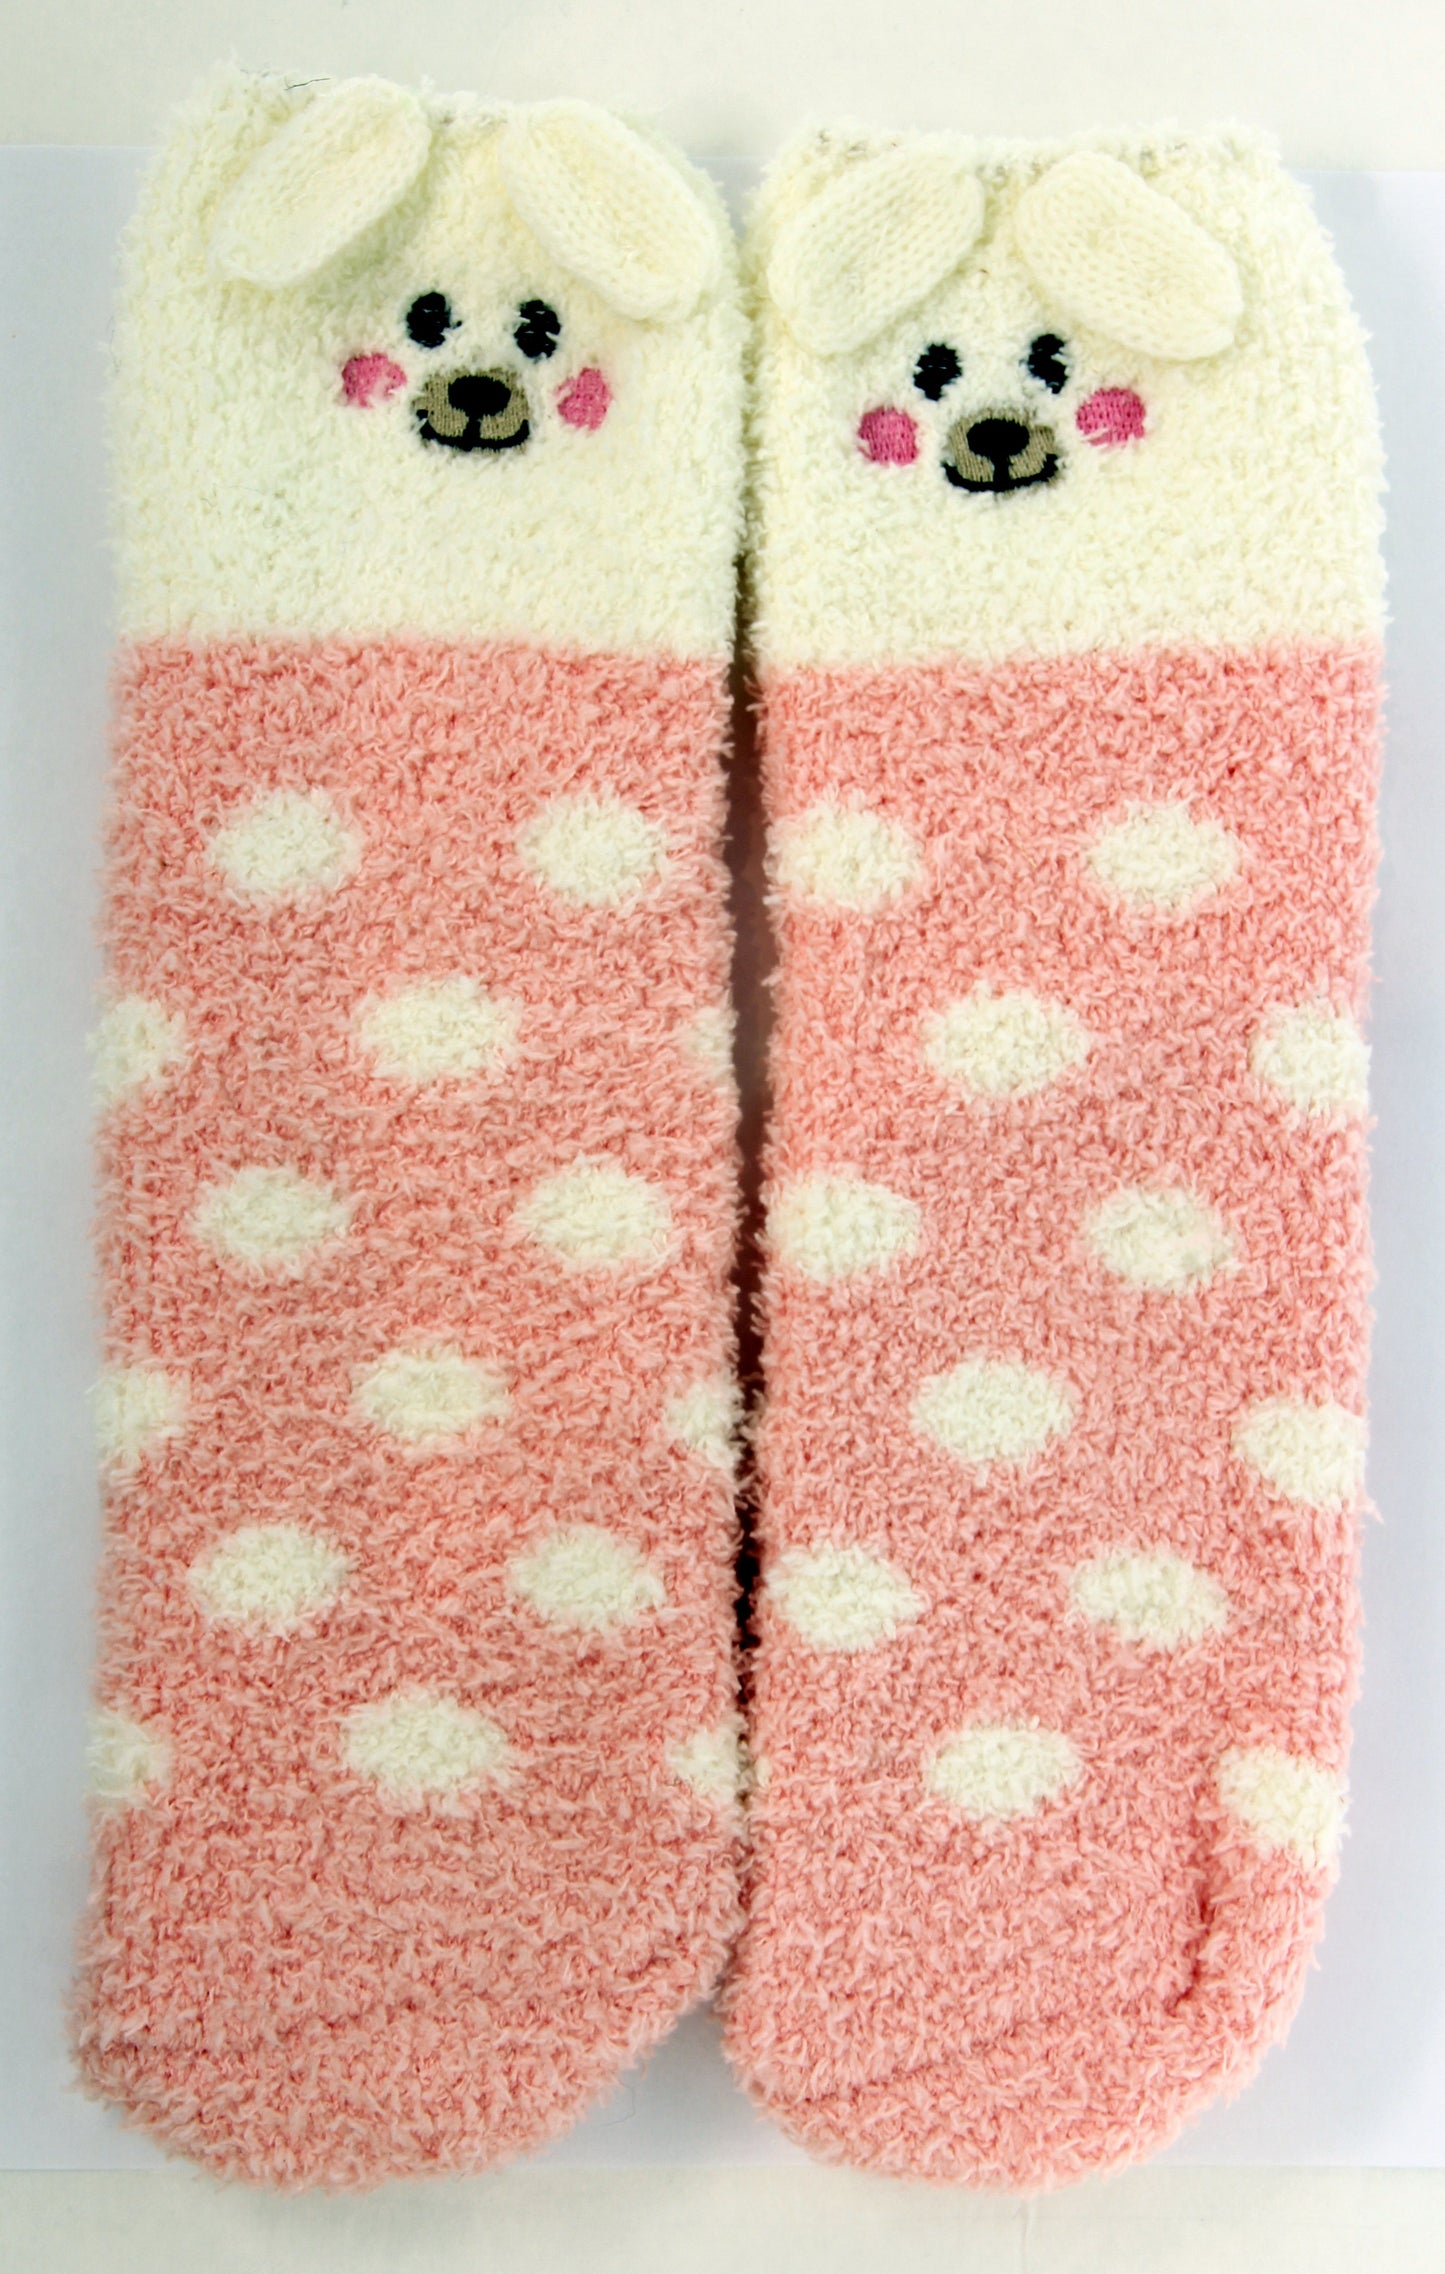 White and Pink Puppy Dog Socks in a Box